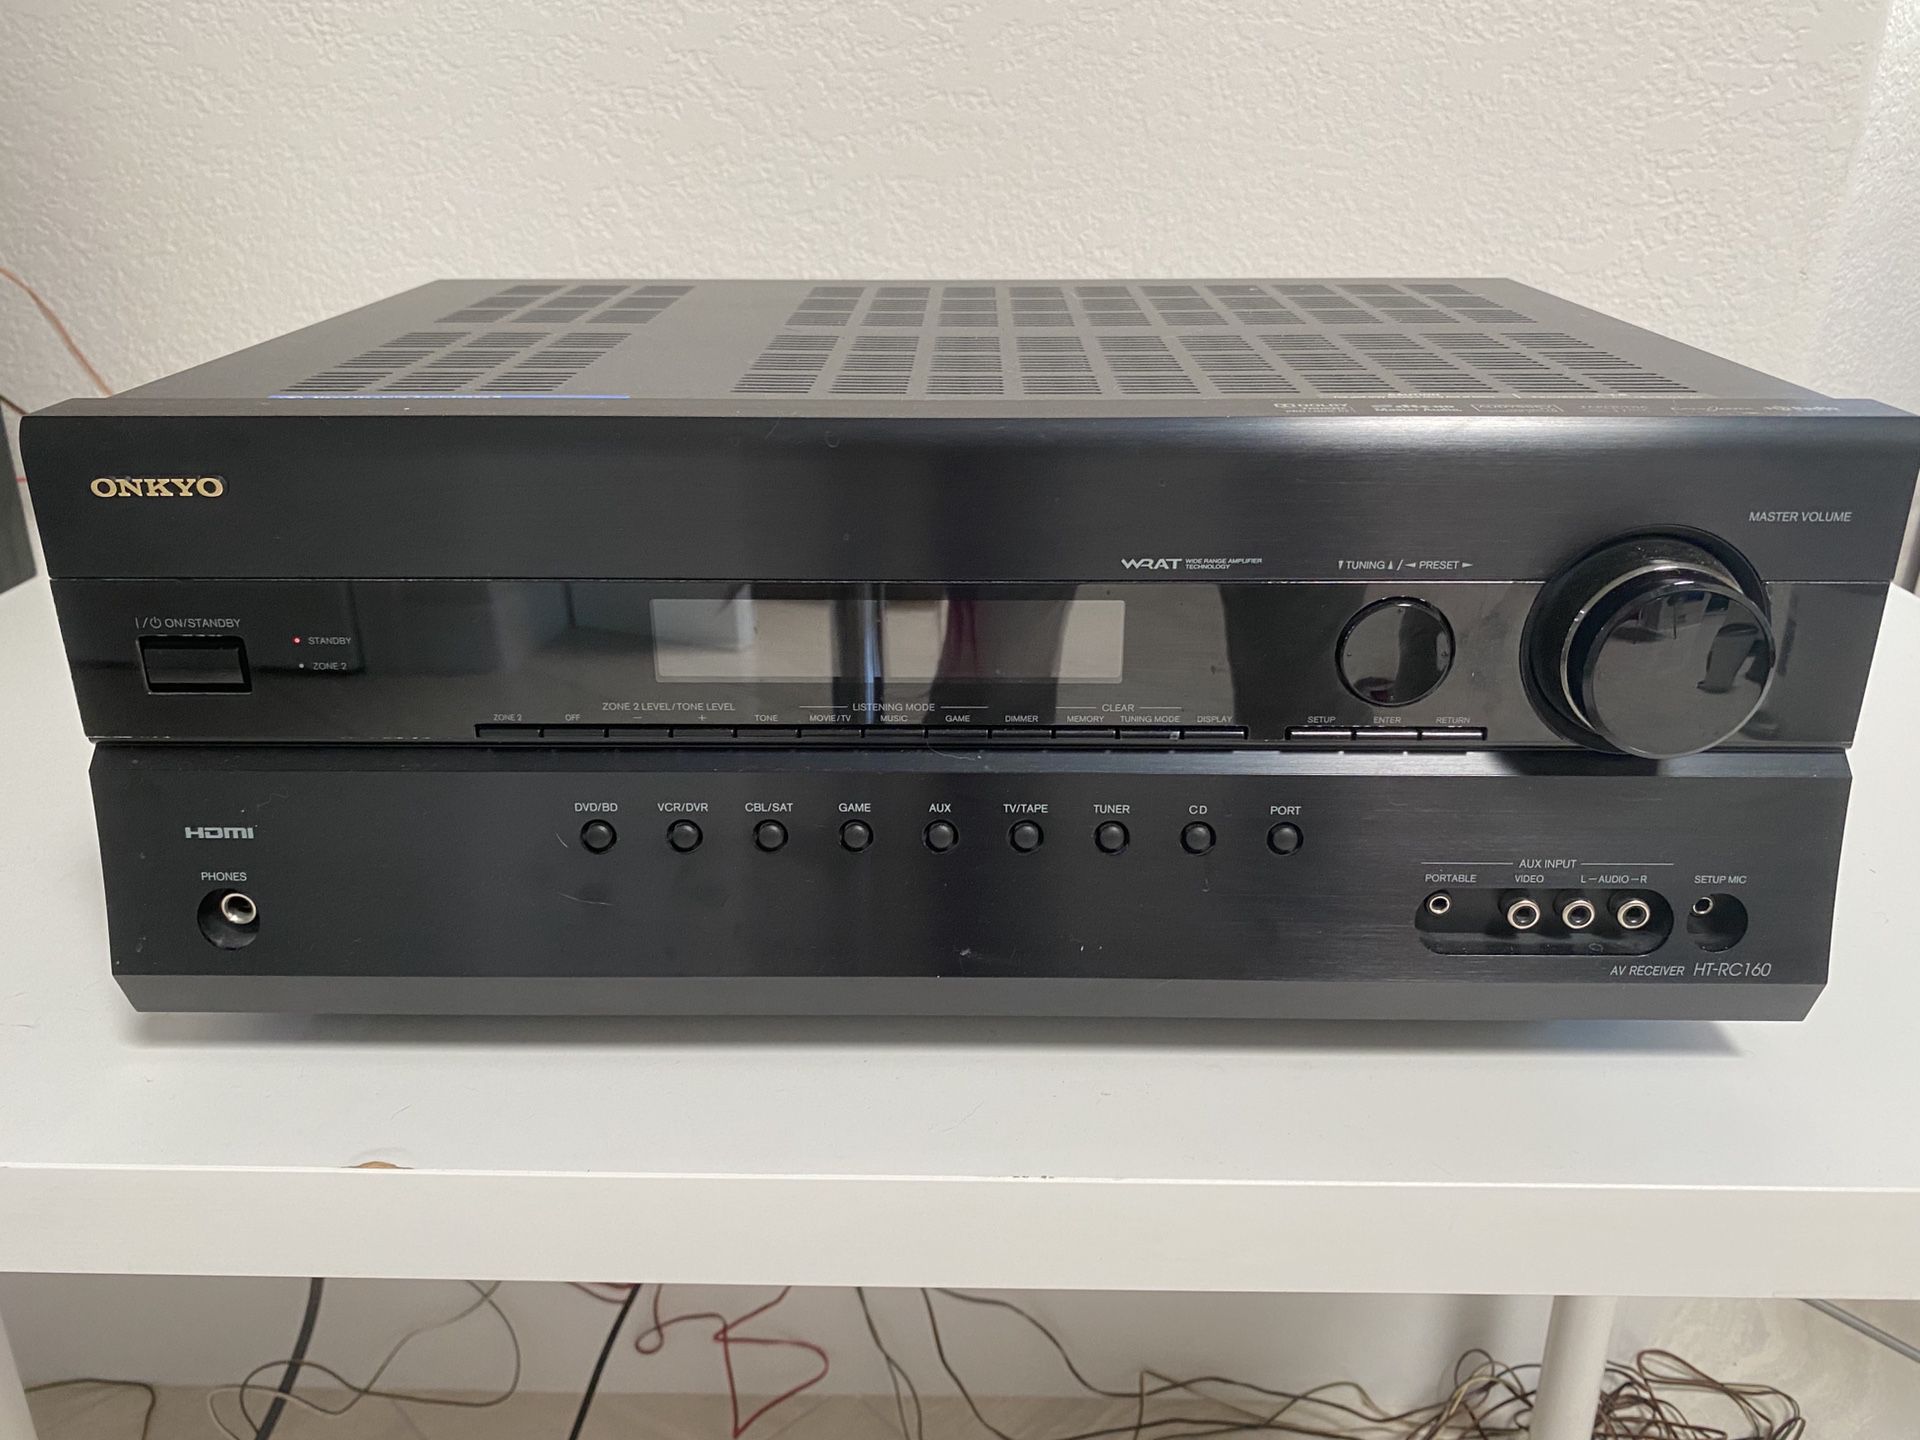 Onkyo 7.2 or 5.1 surround sound receiver with speakers, remote, cables, and 2 speaker stand